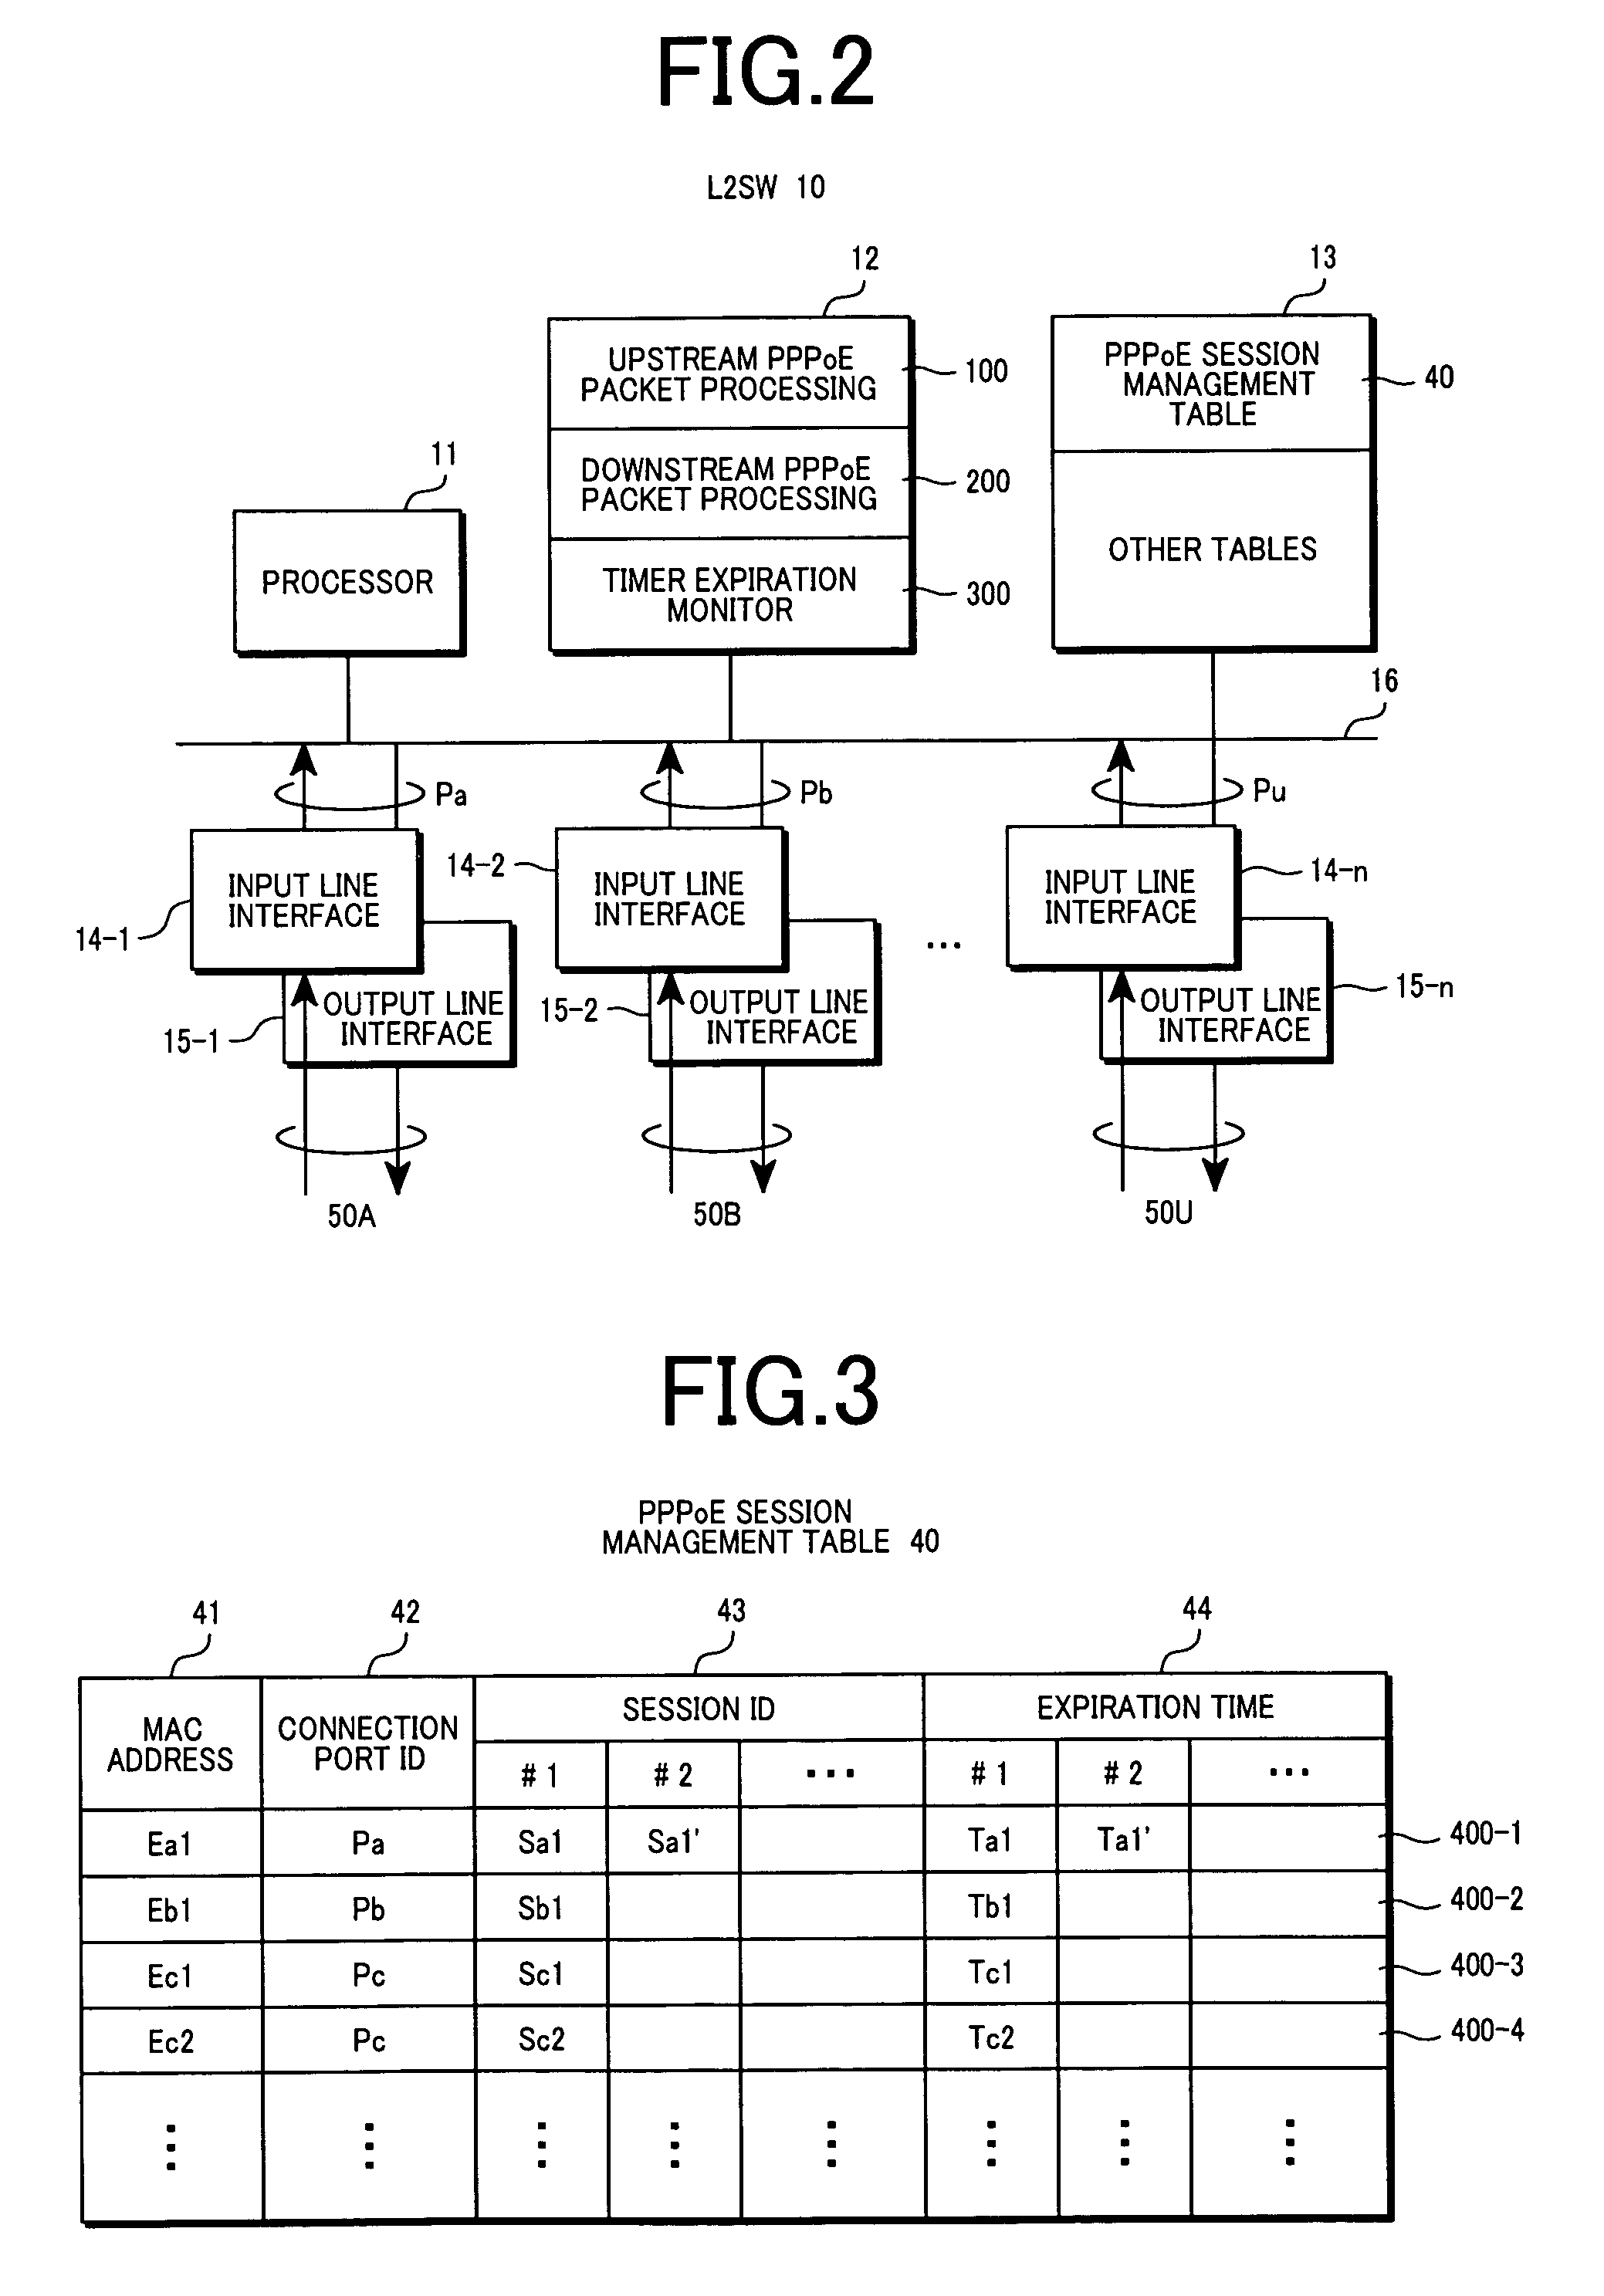 Packet forwarding apparatus with function of limiting the number of user terminals to be connected to ISP